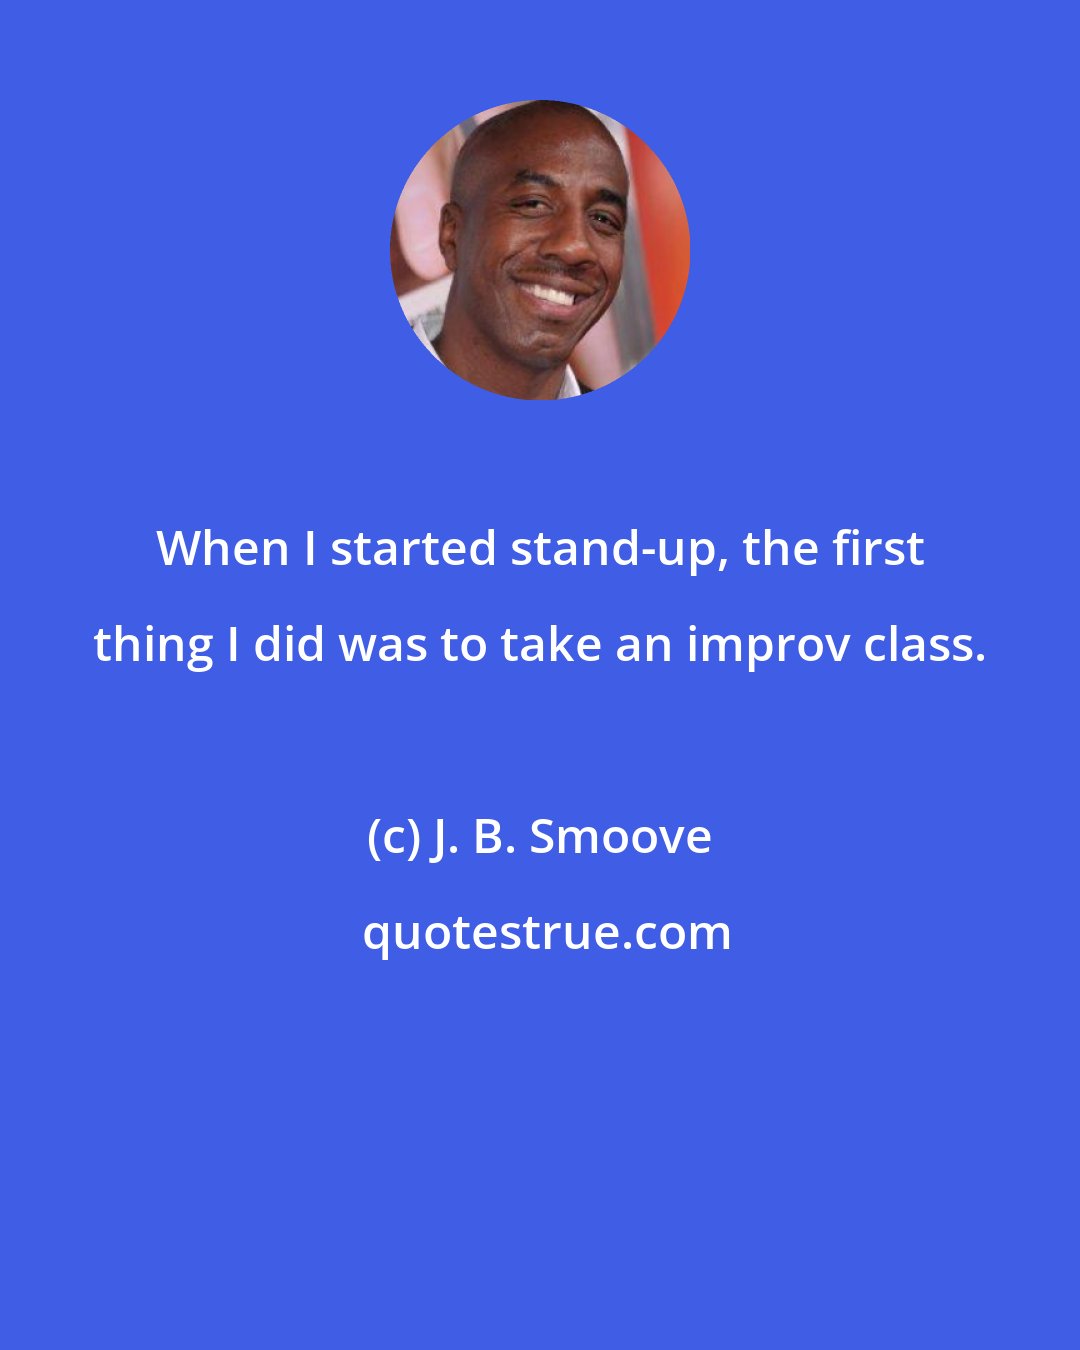 J. B. Smoove: When I started stand-up, the first thing I did was to take an improv class.